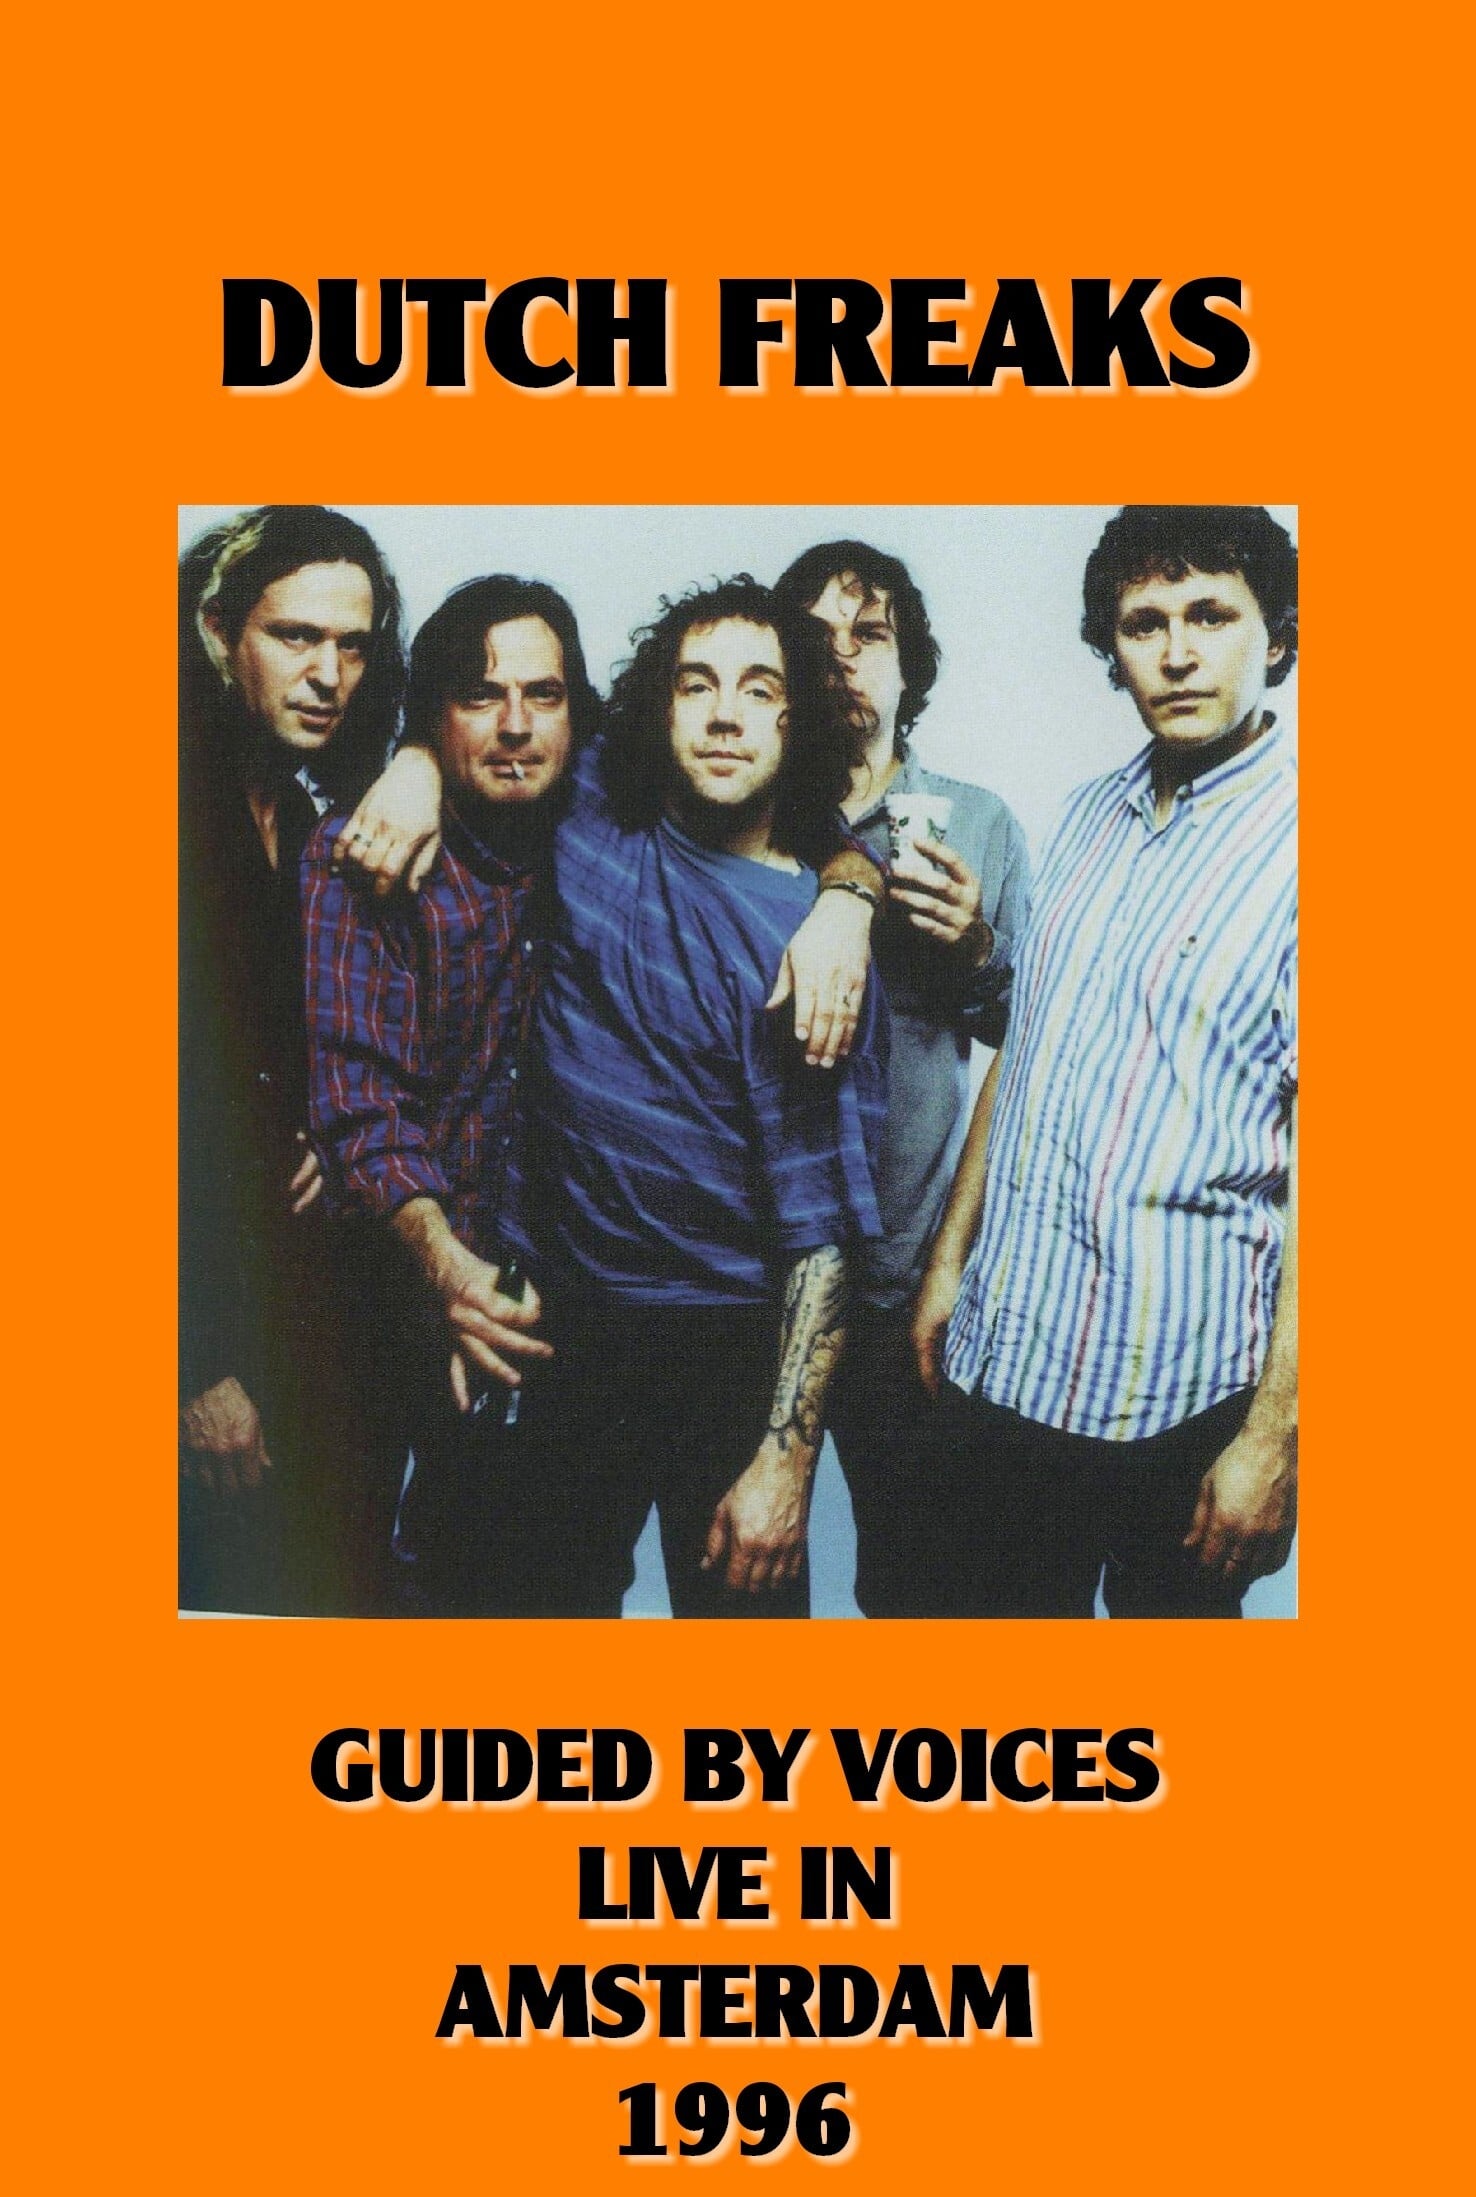 Dutch Freaks: Guided By Voices Live in Amsterdam